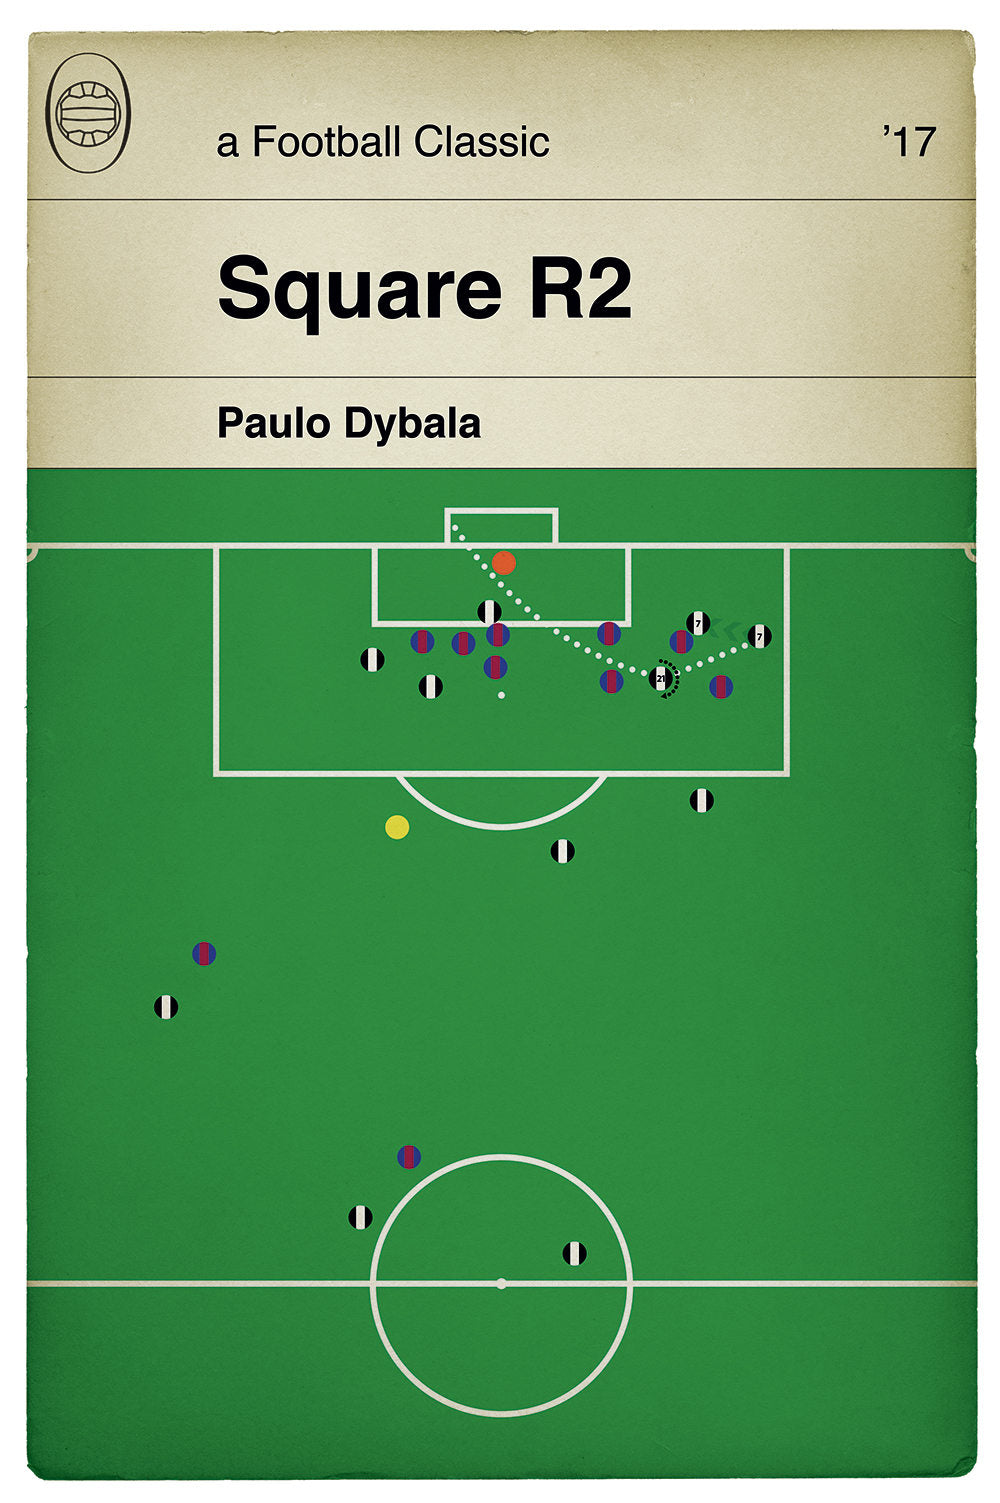 Juventus goal Poster v Barcelona - Paulo Dybala - Square R2 - Classic Book Cover Print - Football Gift (Various Sizes)